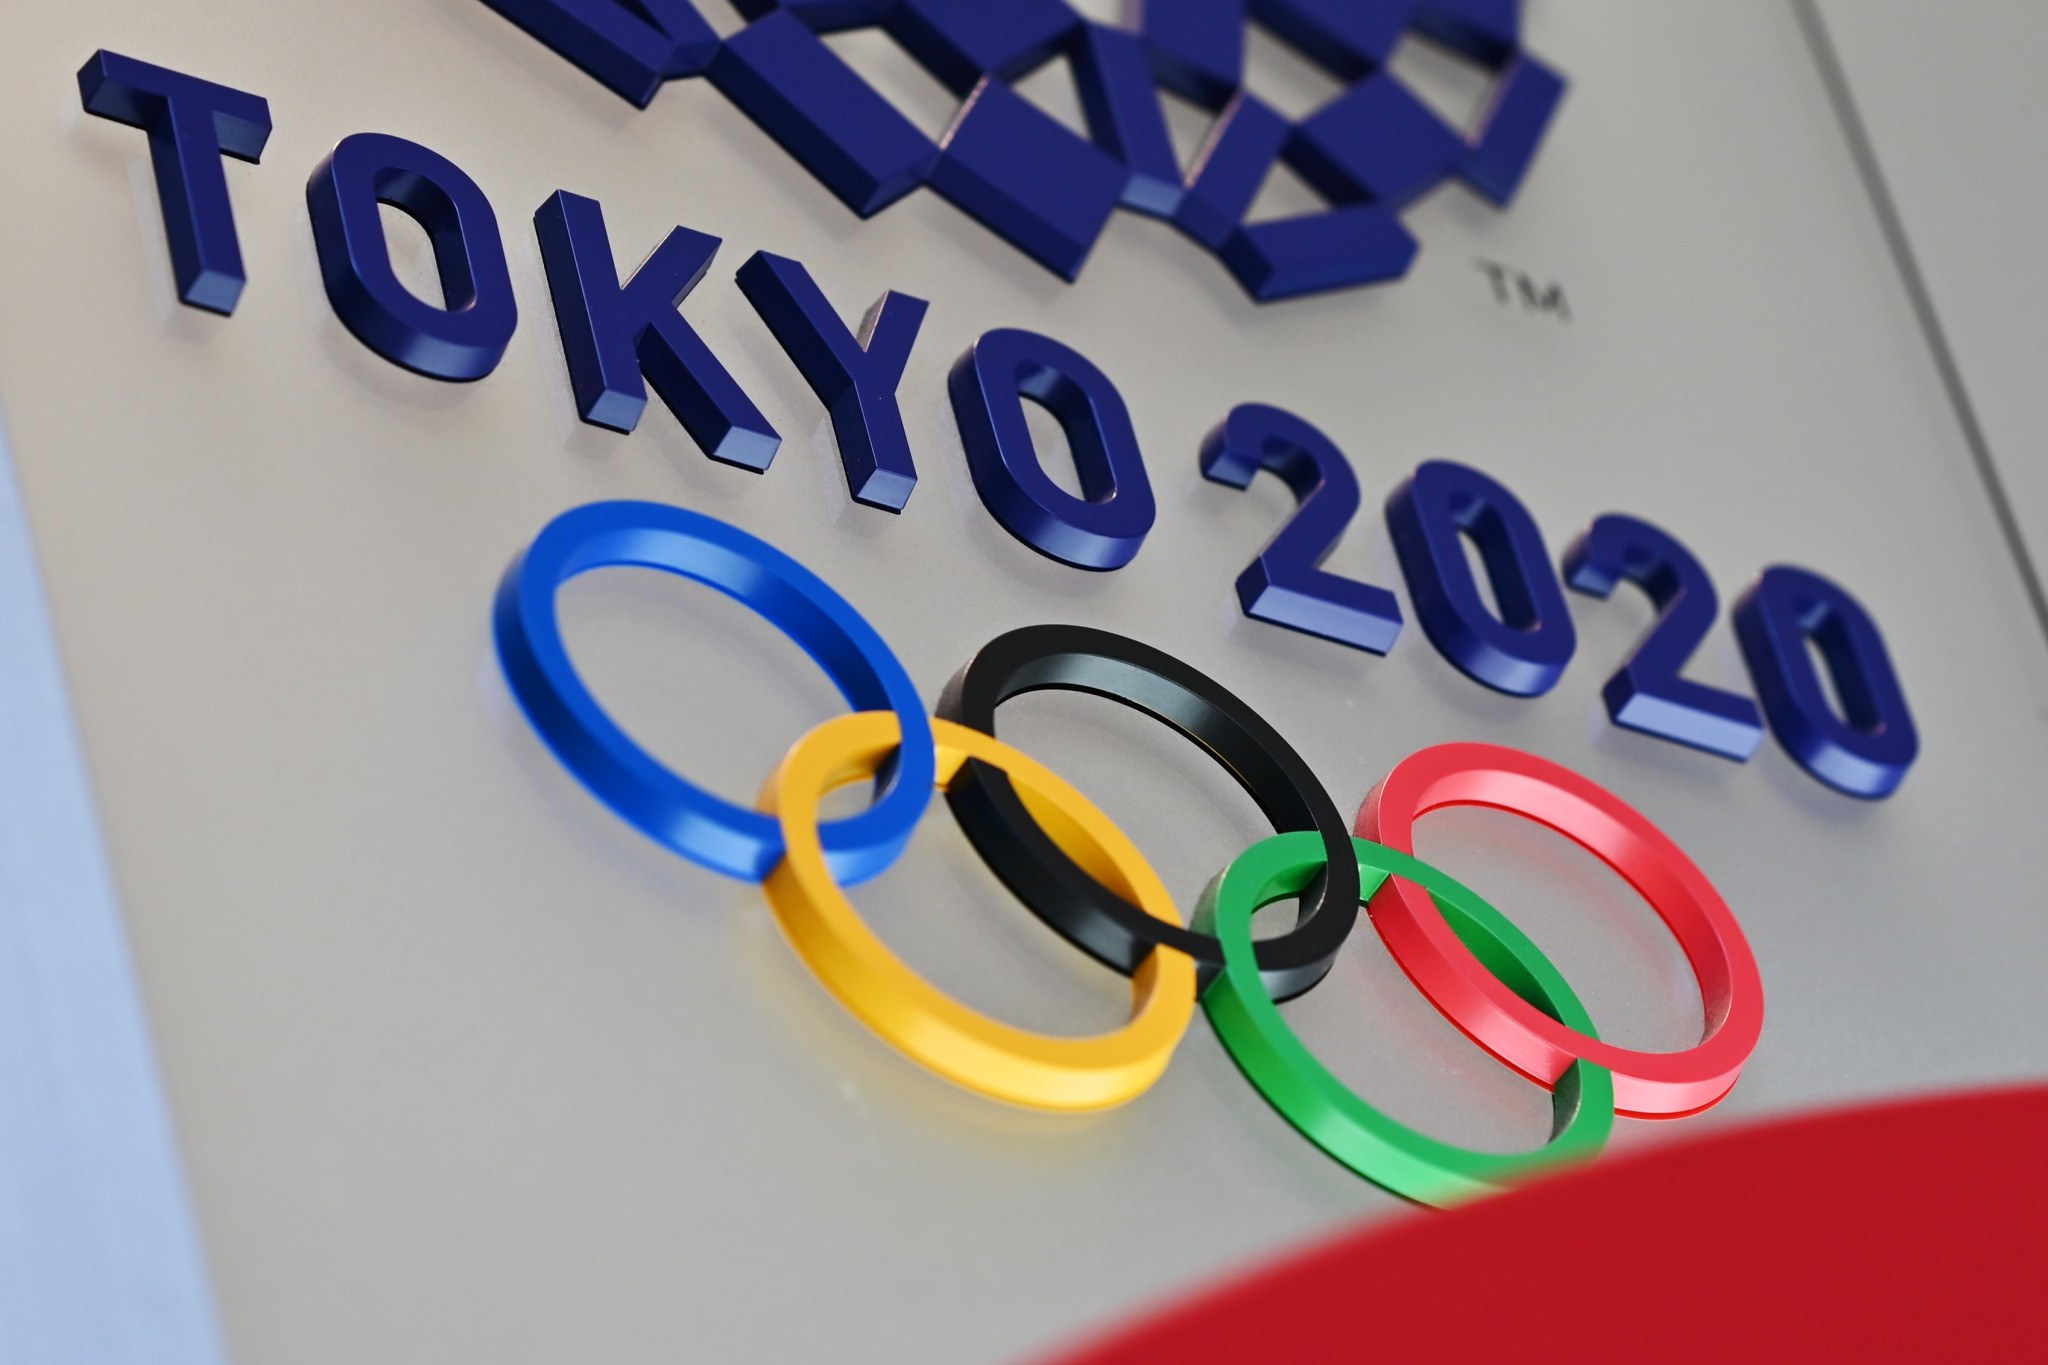 Tokyo 2020 organisers may be forced to move offices following postponement